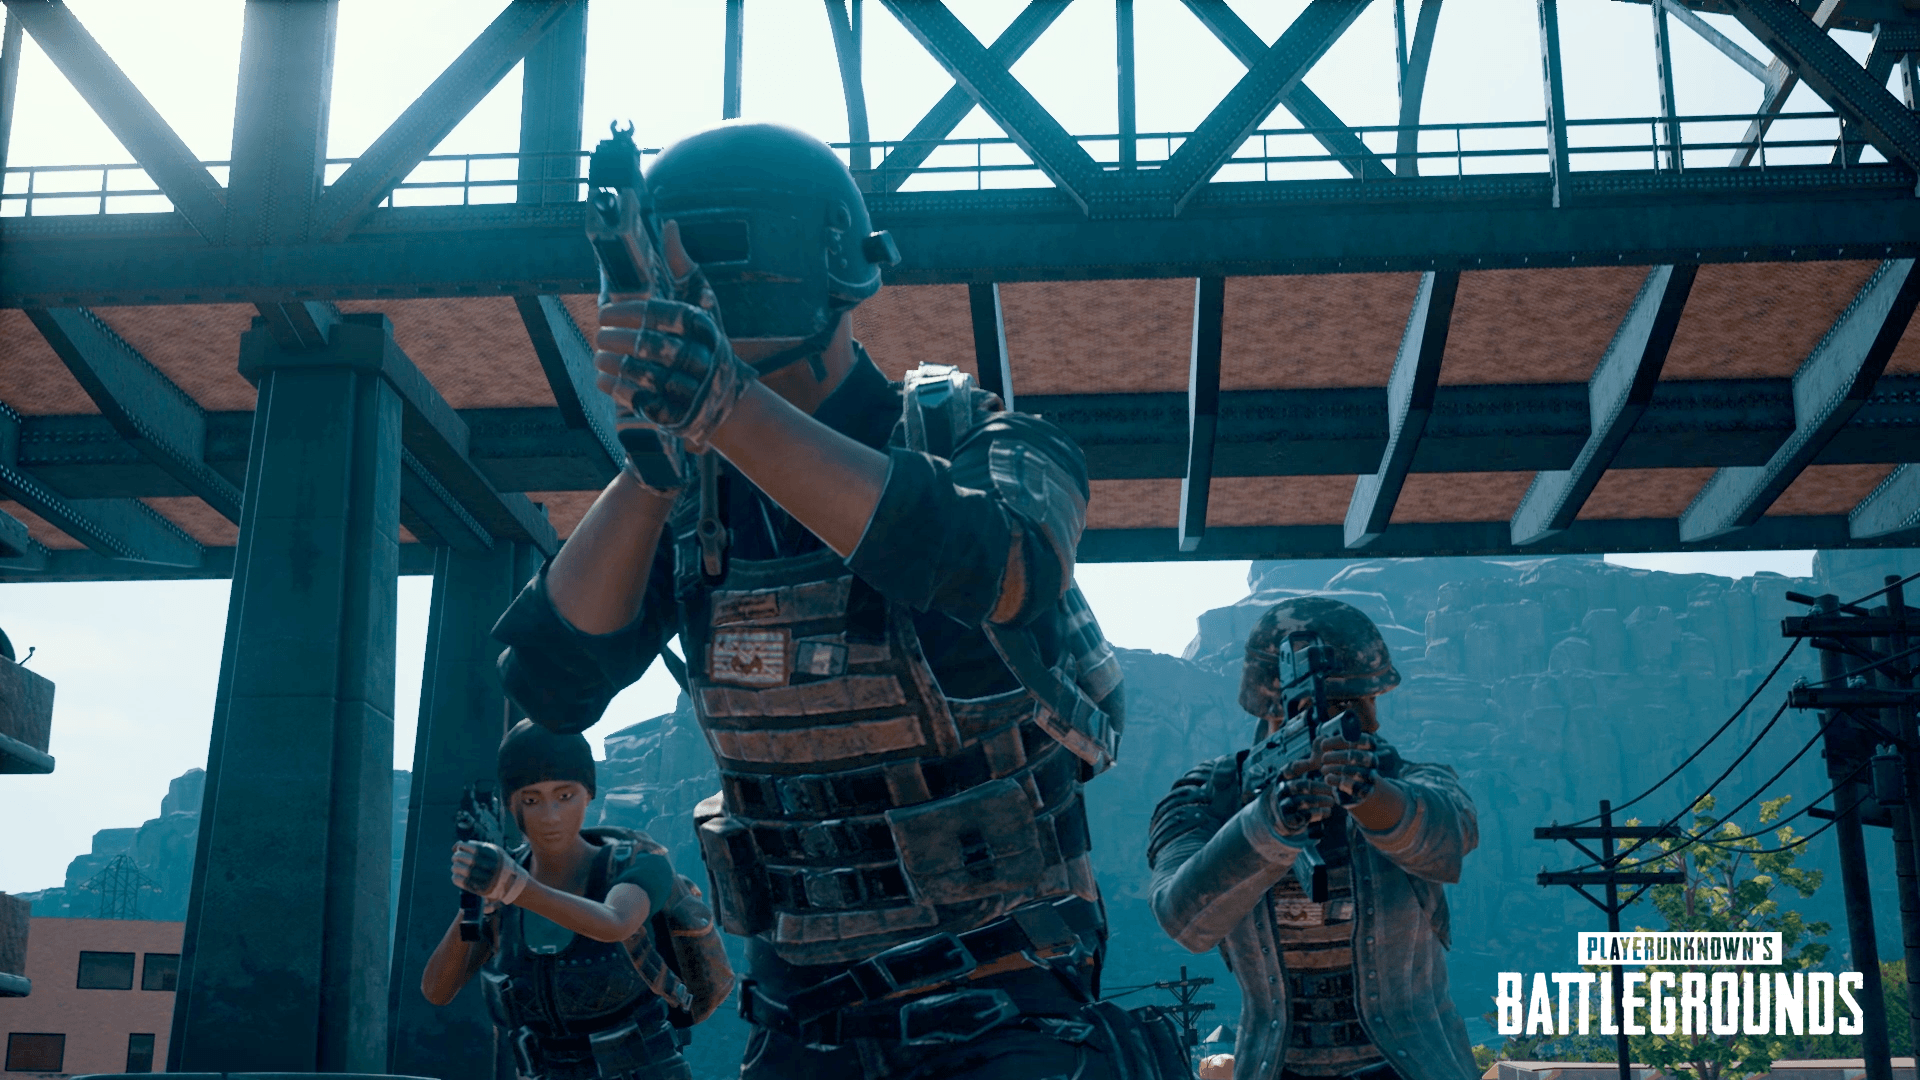 PUBG Announces 30 Million Players Across PC and Xbox One